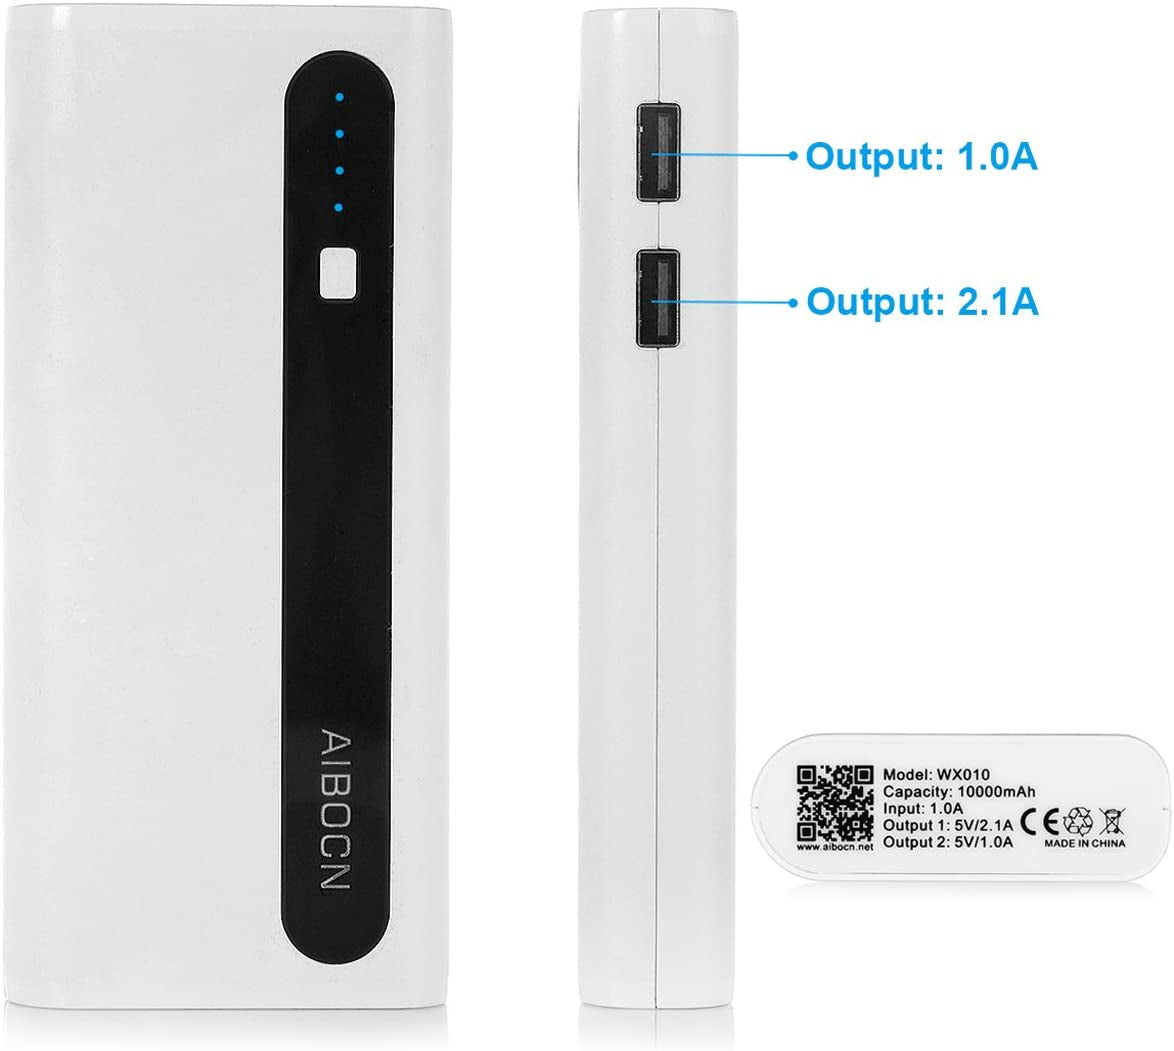 Power Bank 10,000Mah Phone Portable Charger with Flashlight (White+Black)